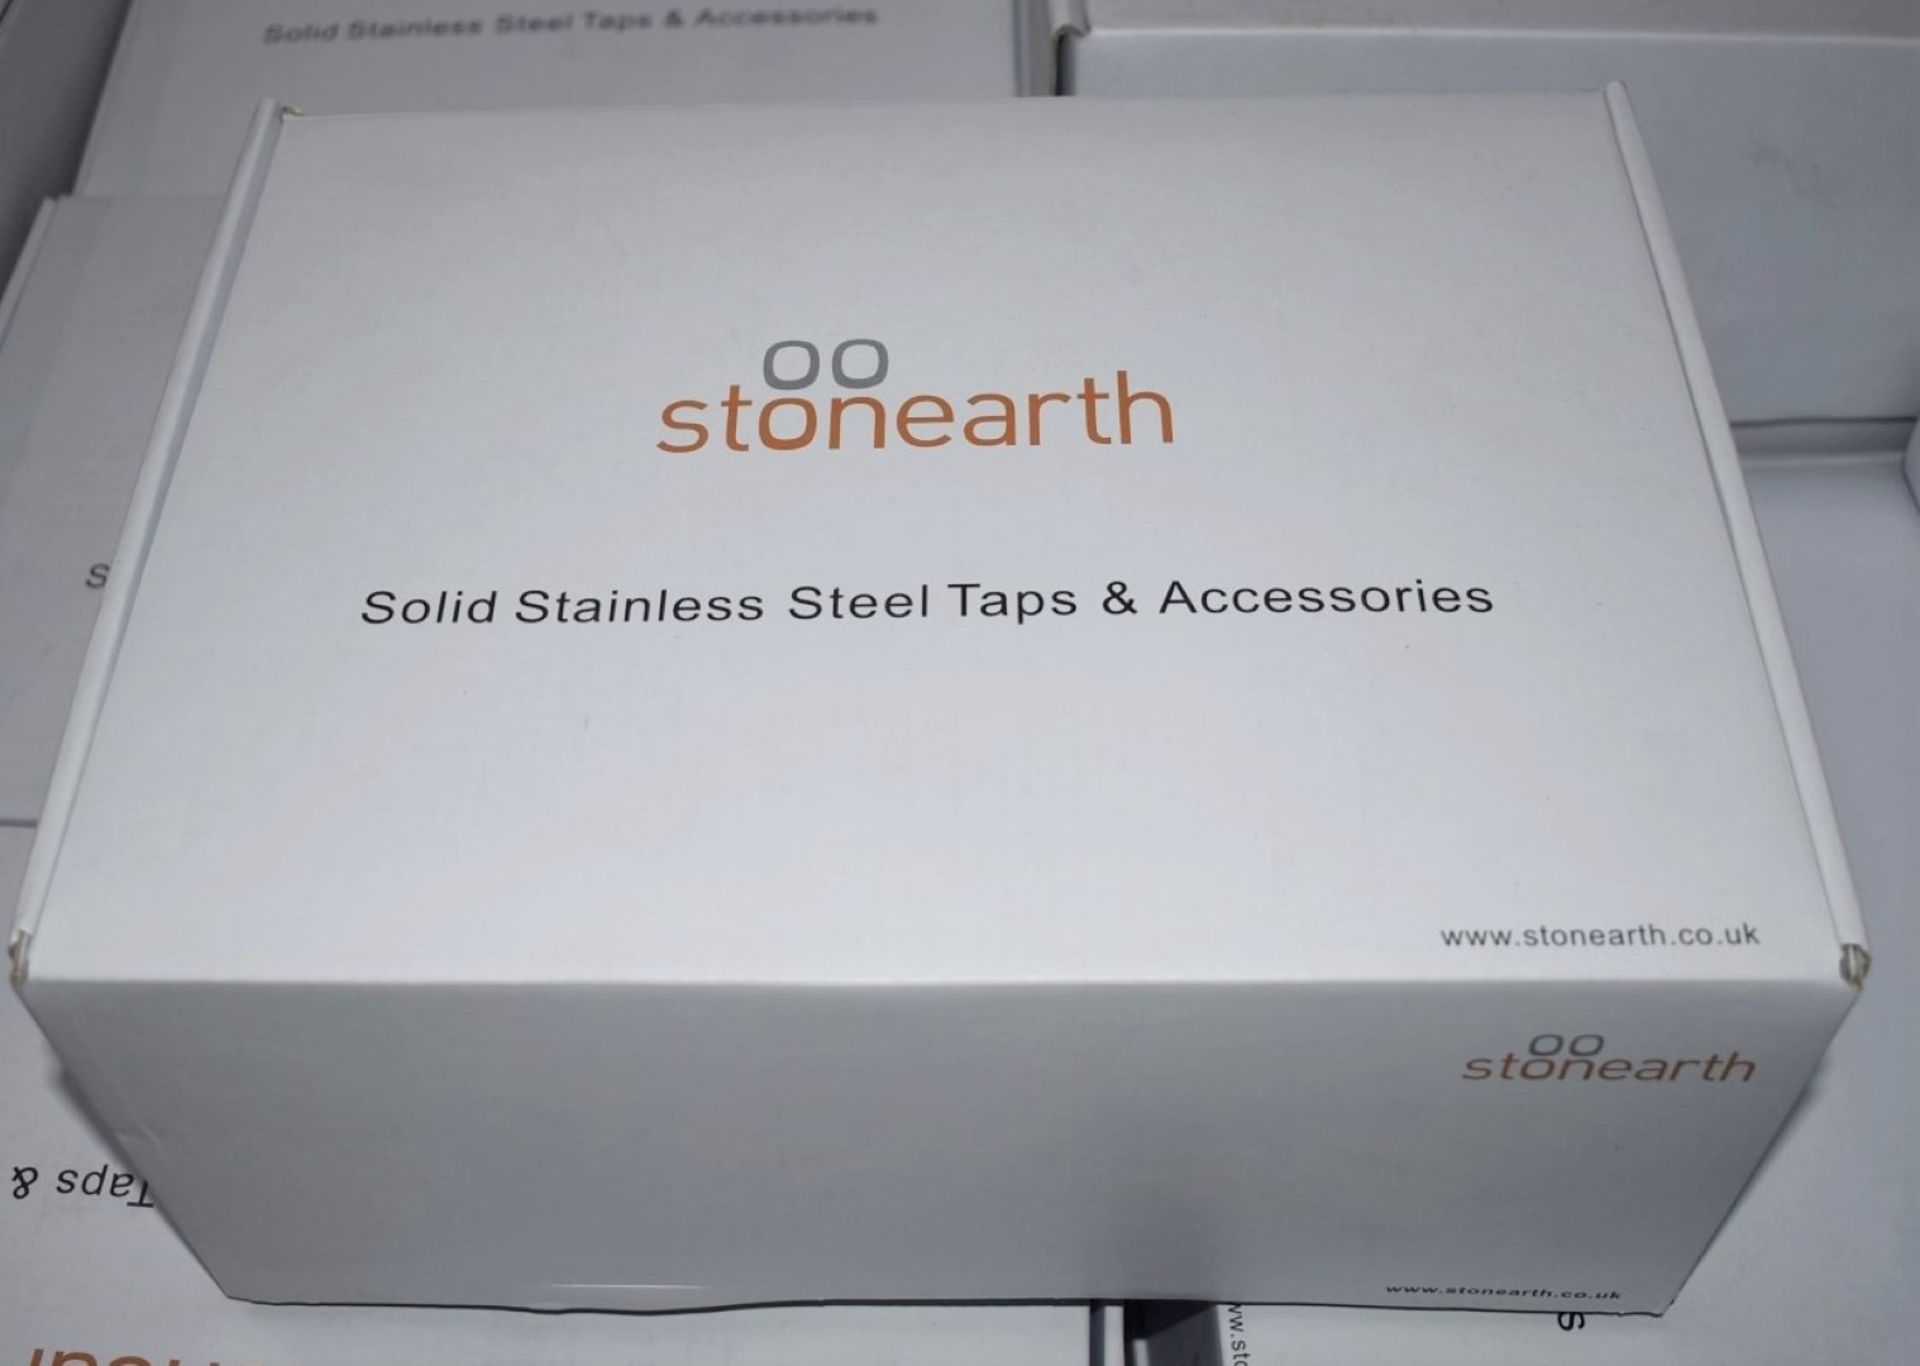 1 x Stonearth 'Metro' Stainless Steel Wall Mounted Tap - Brand New & Boxed - RRP £345 - Ref: TP823 - Image 2 of 4